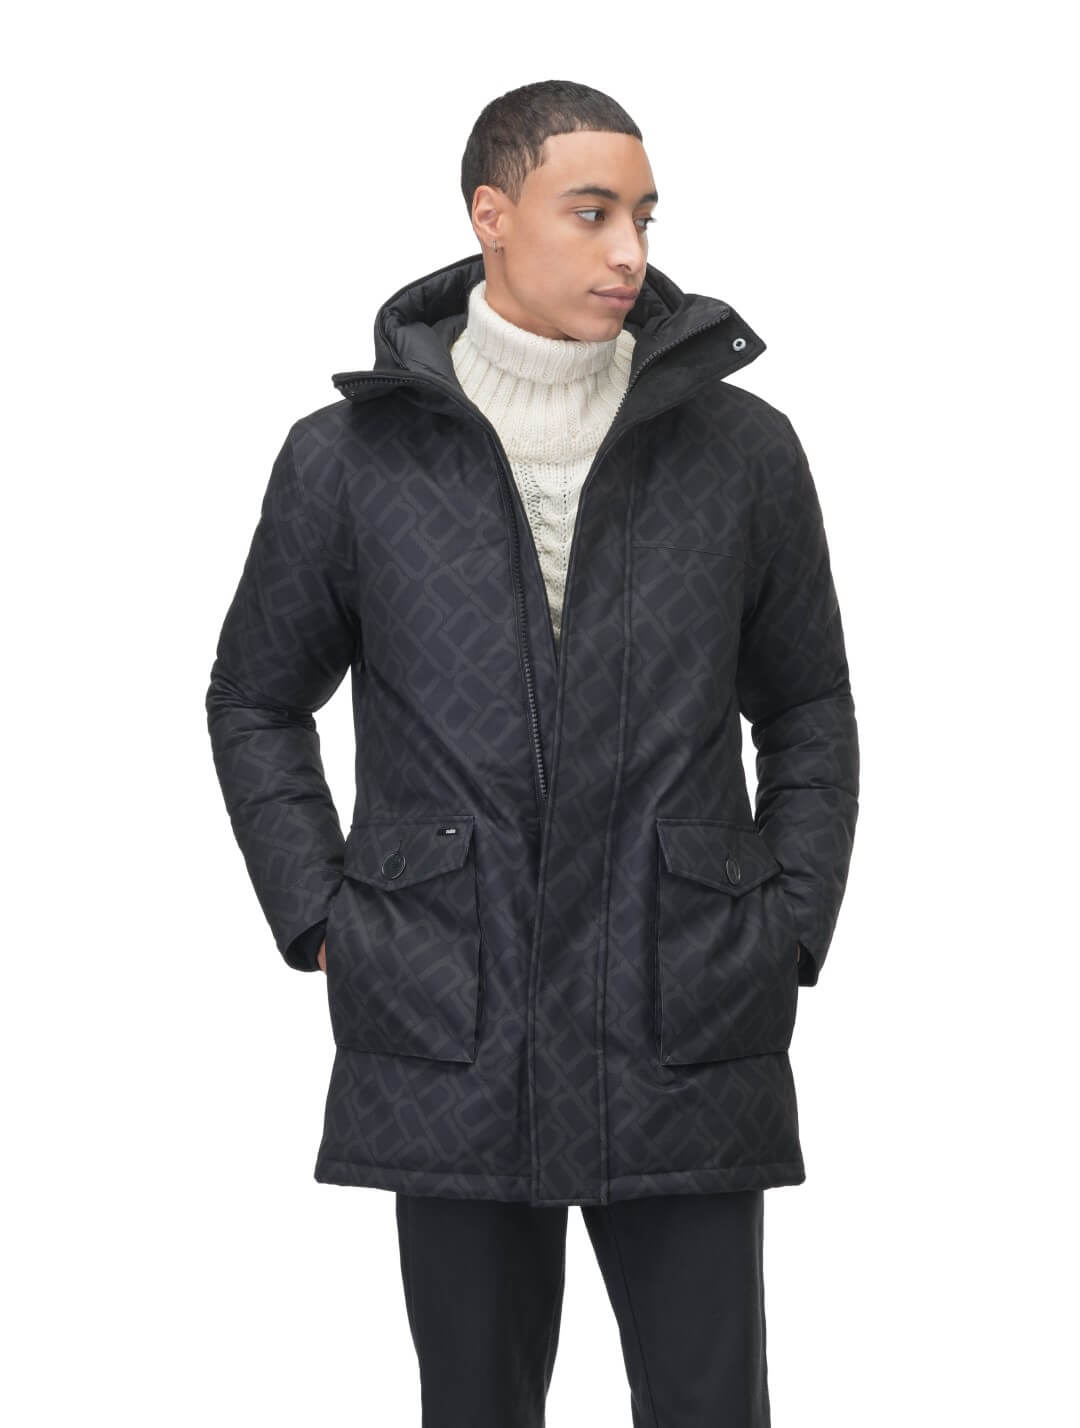 Yves Furless Men's Parka in thigh length, Canadian white duck down insulation, non-removable down-filled hood, flap pockets at waist, centre-front two-way zipper with magnetic wind flap, and elastic ribbed cuffs, in Dark Monogram